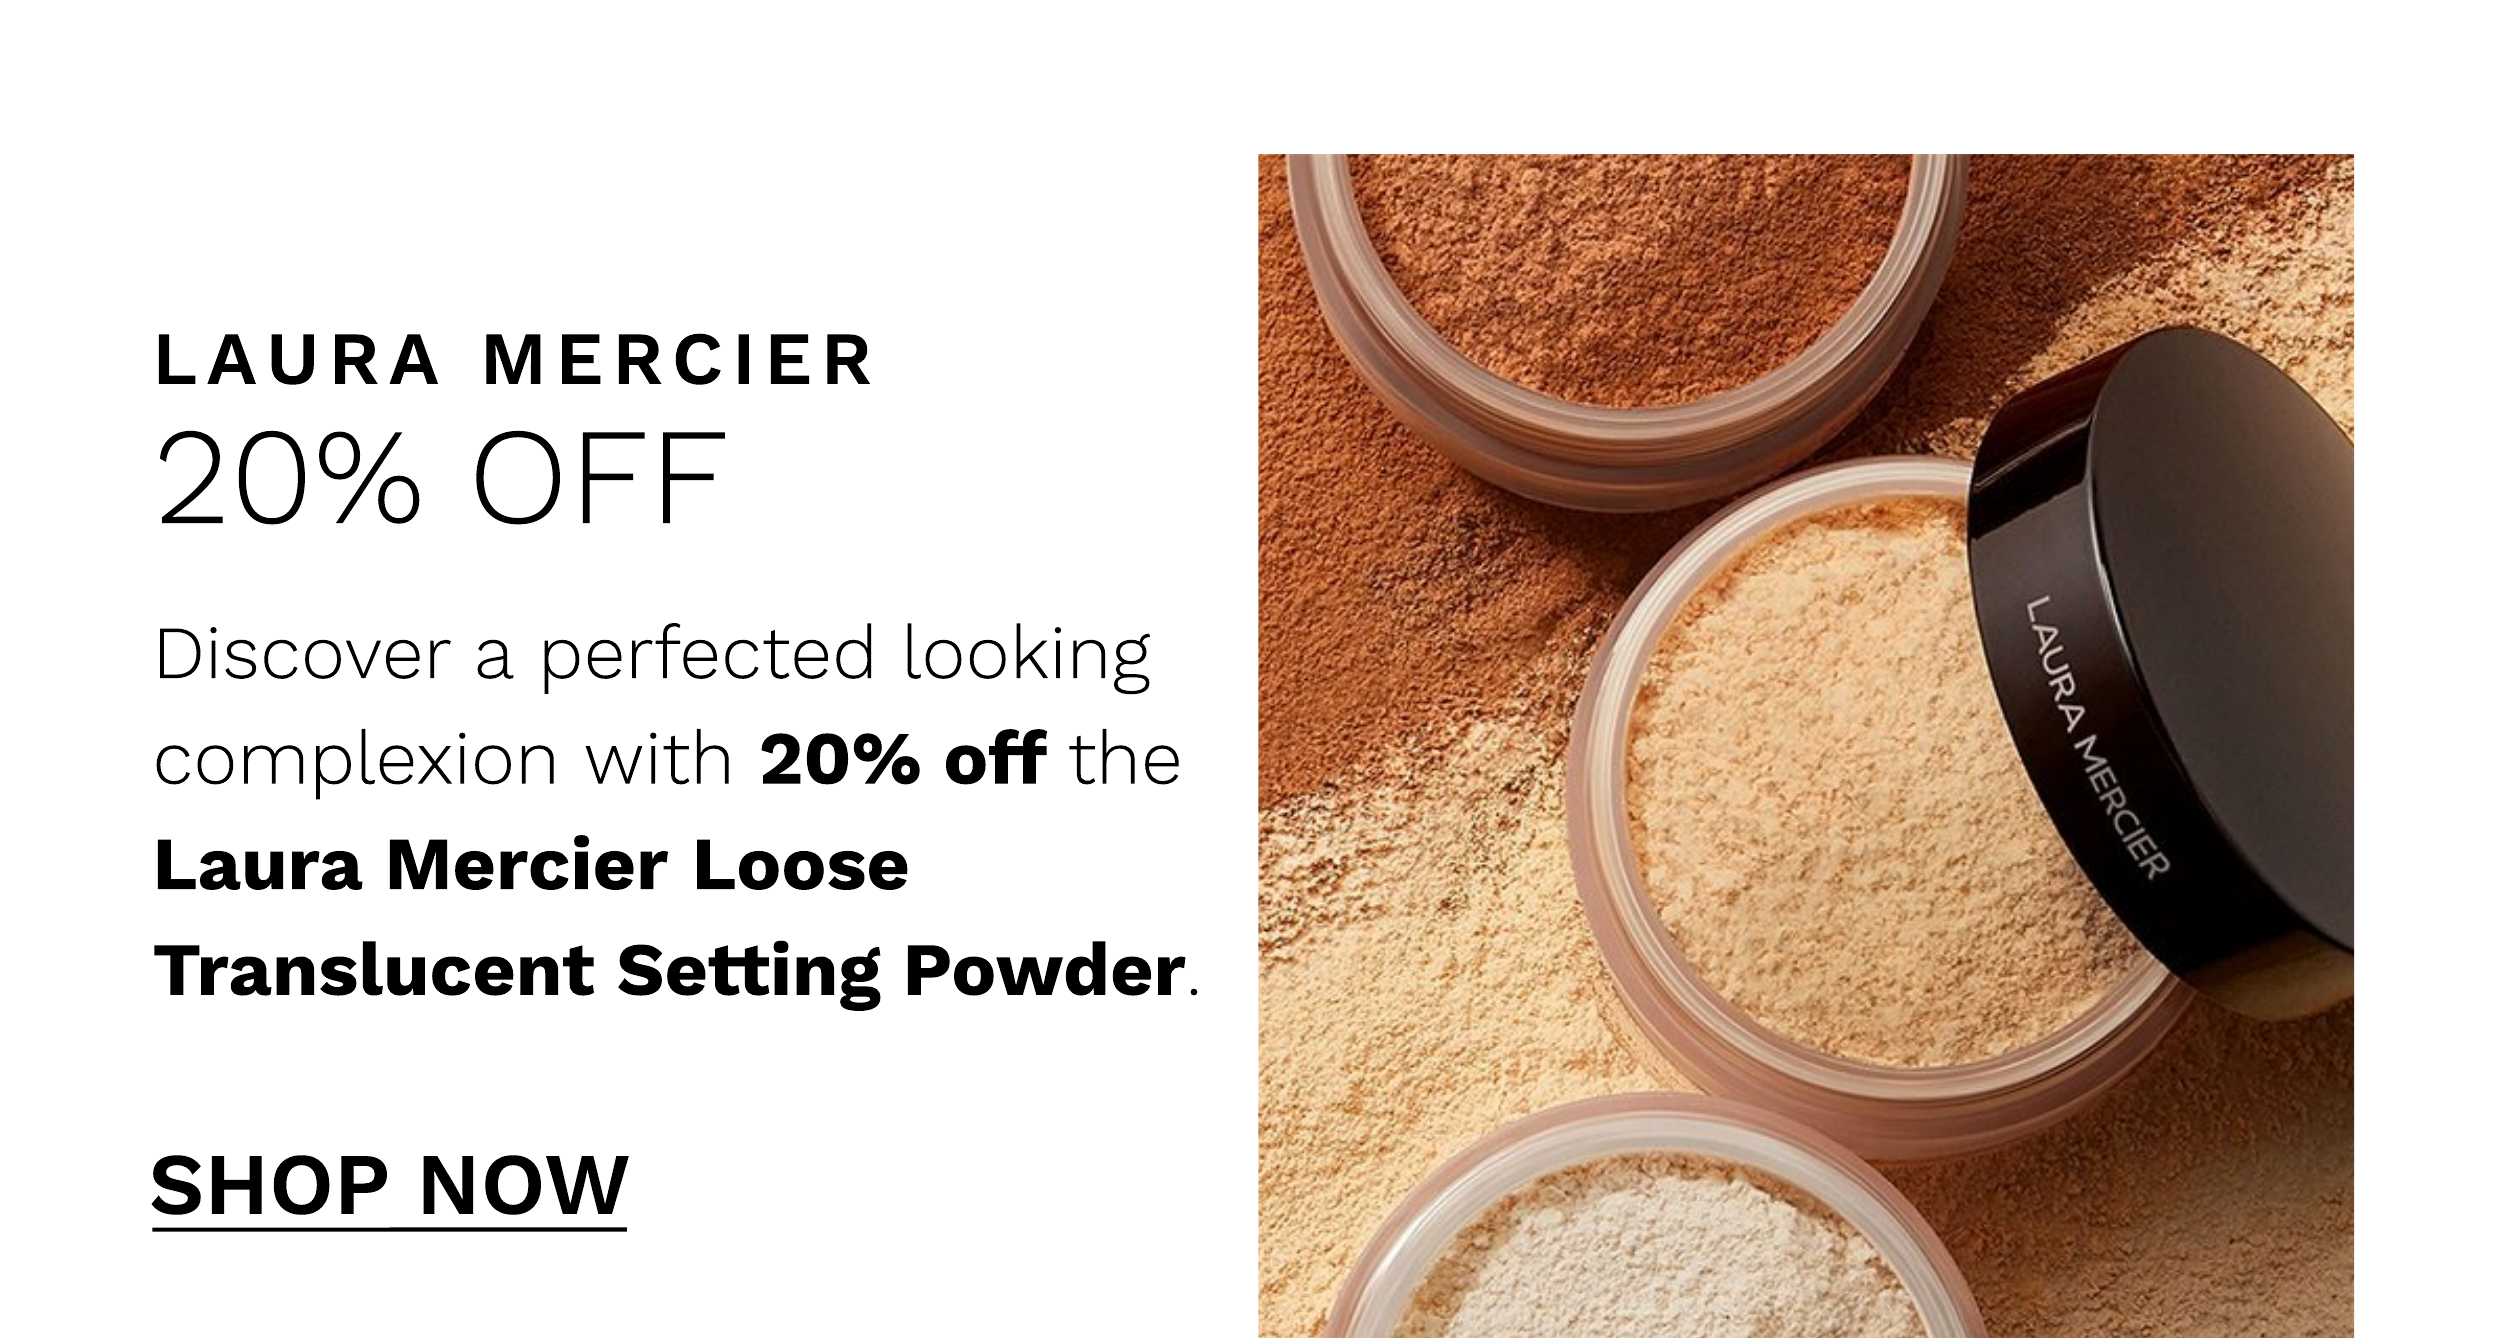 LAURA MERCIER 20% OFF Discover a perfected looking complexion with 20% off the Laura Mercier Loose Translucent Setting Powder. SHOP NOW 